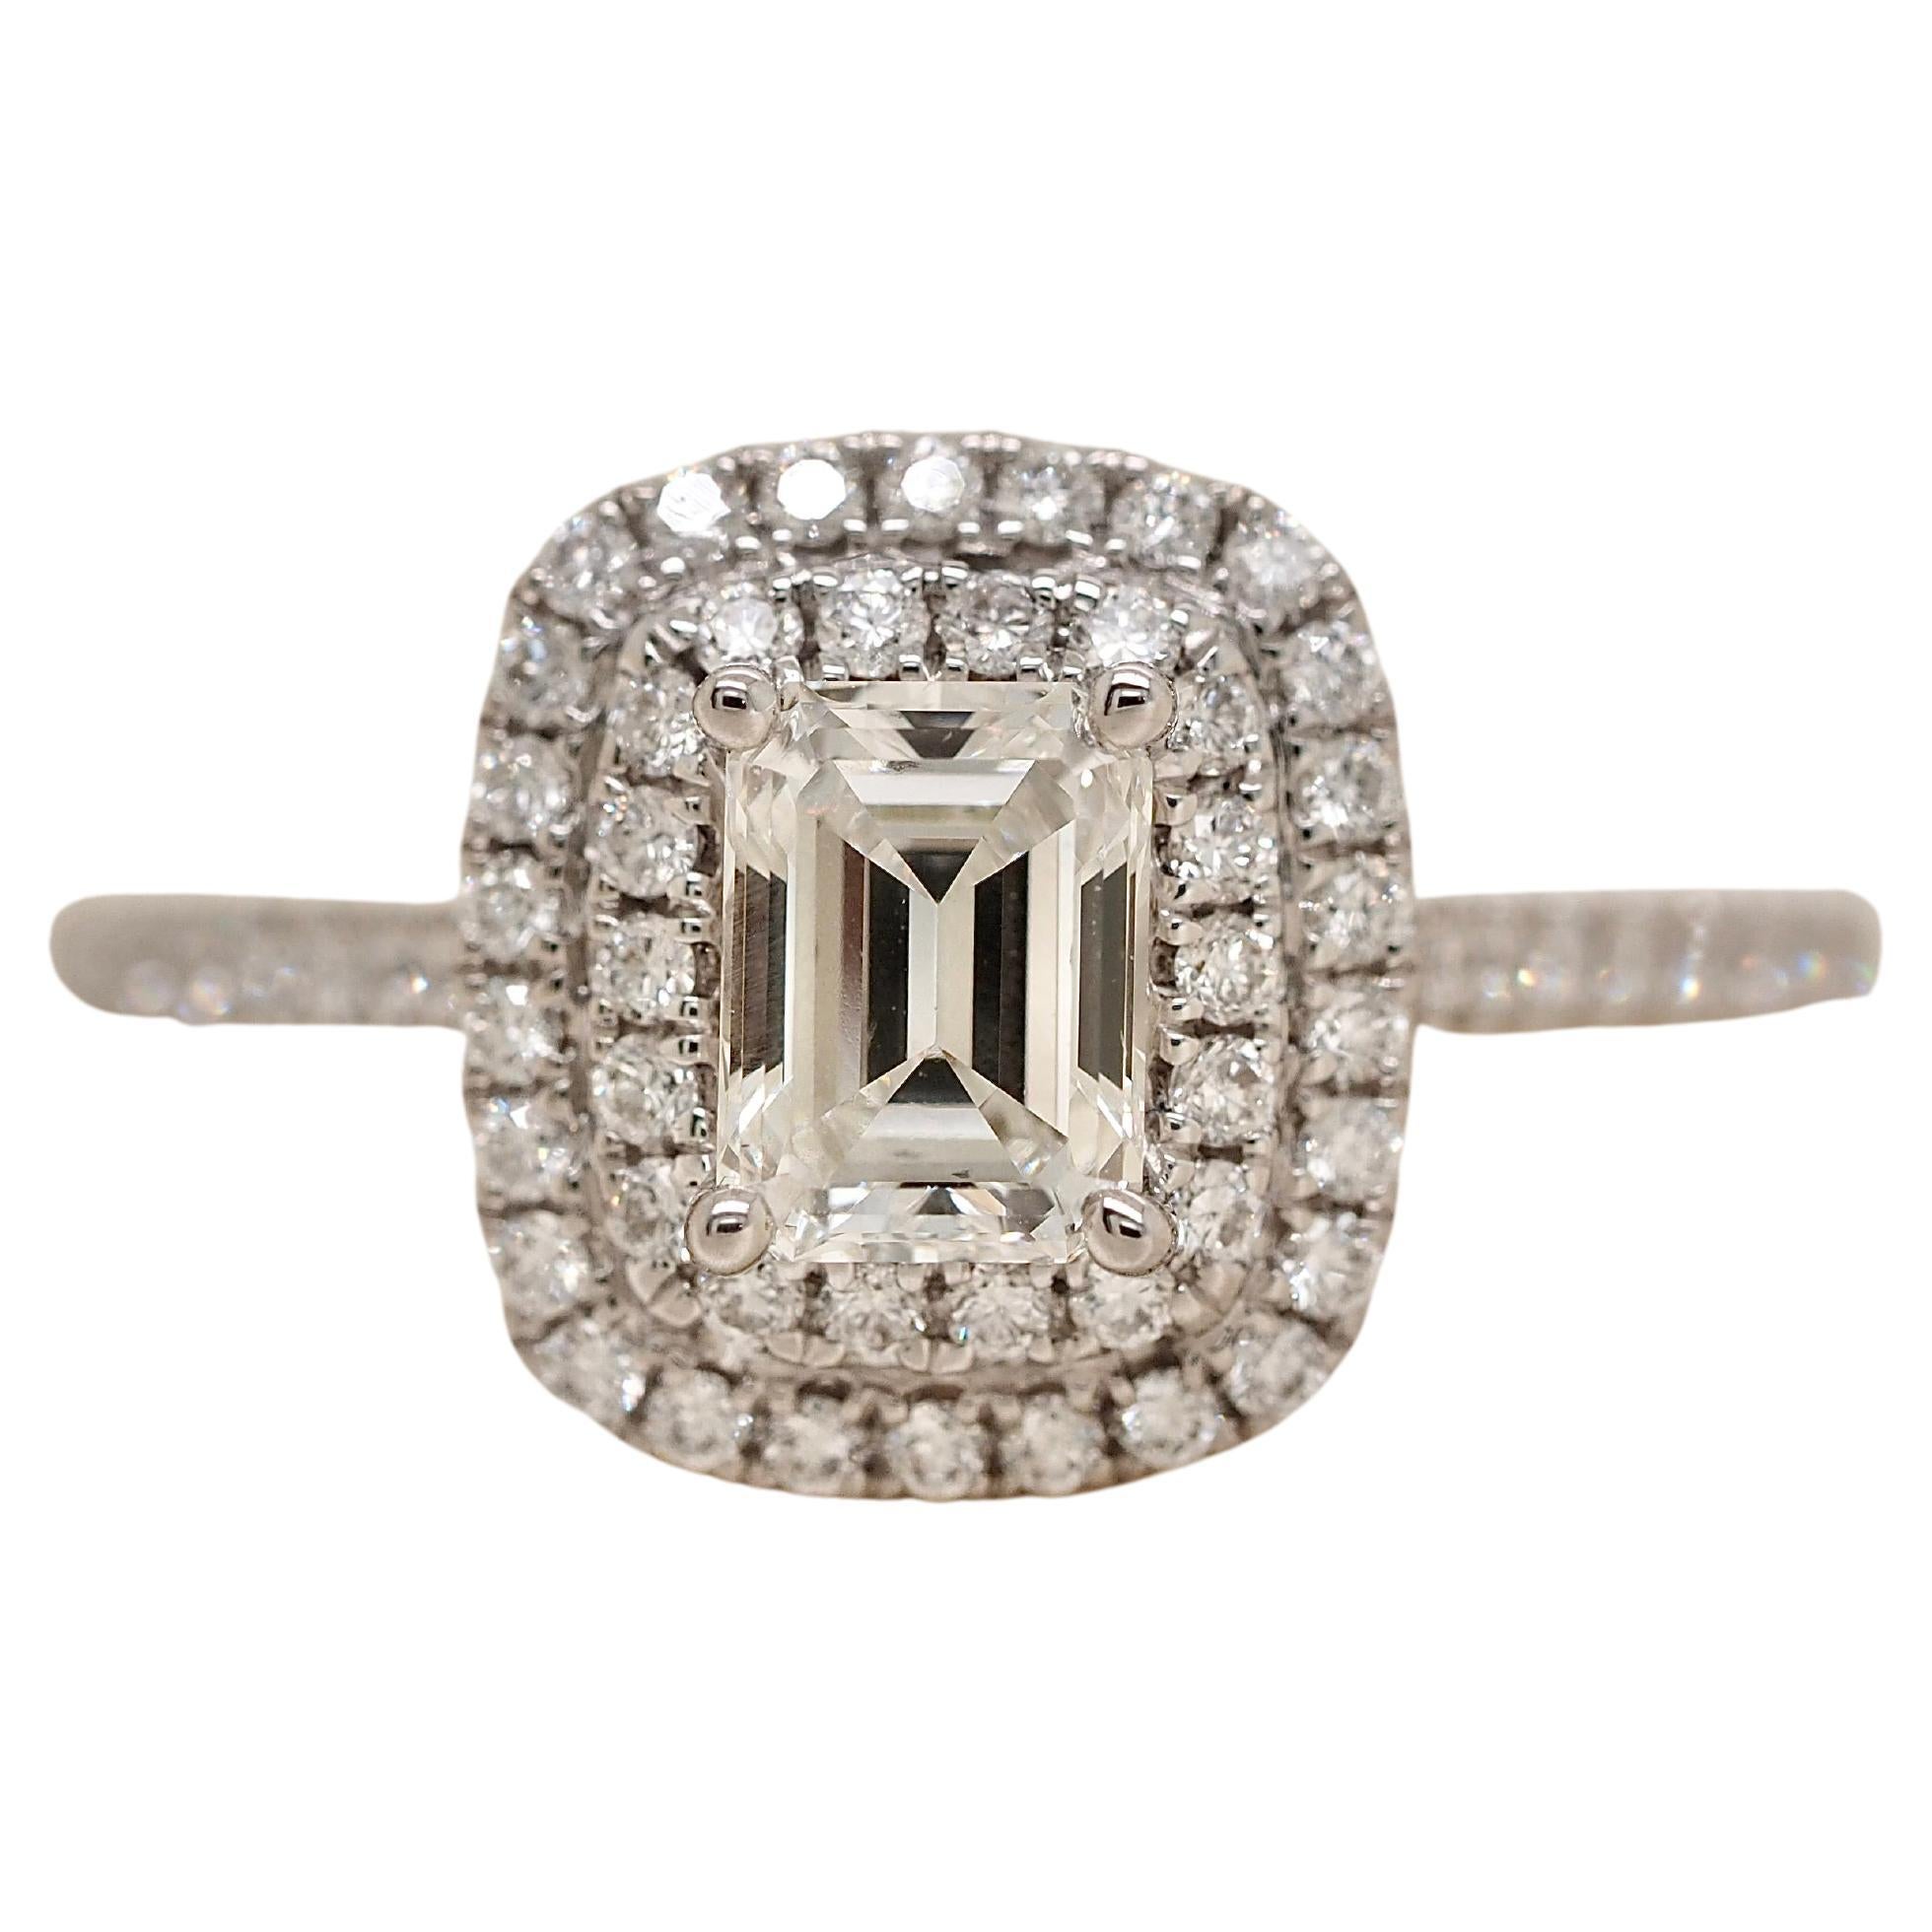 1.09CTW Emerald Cut Diamond Double Halo Engagement Ring in 14k White Gold For Sale